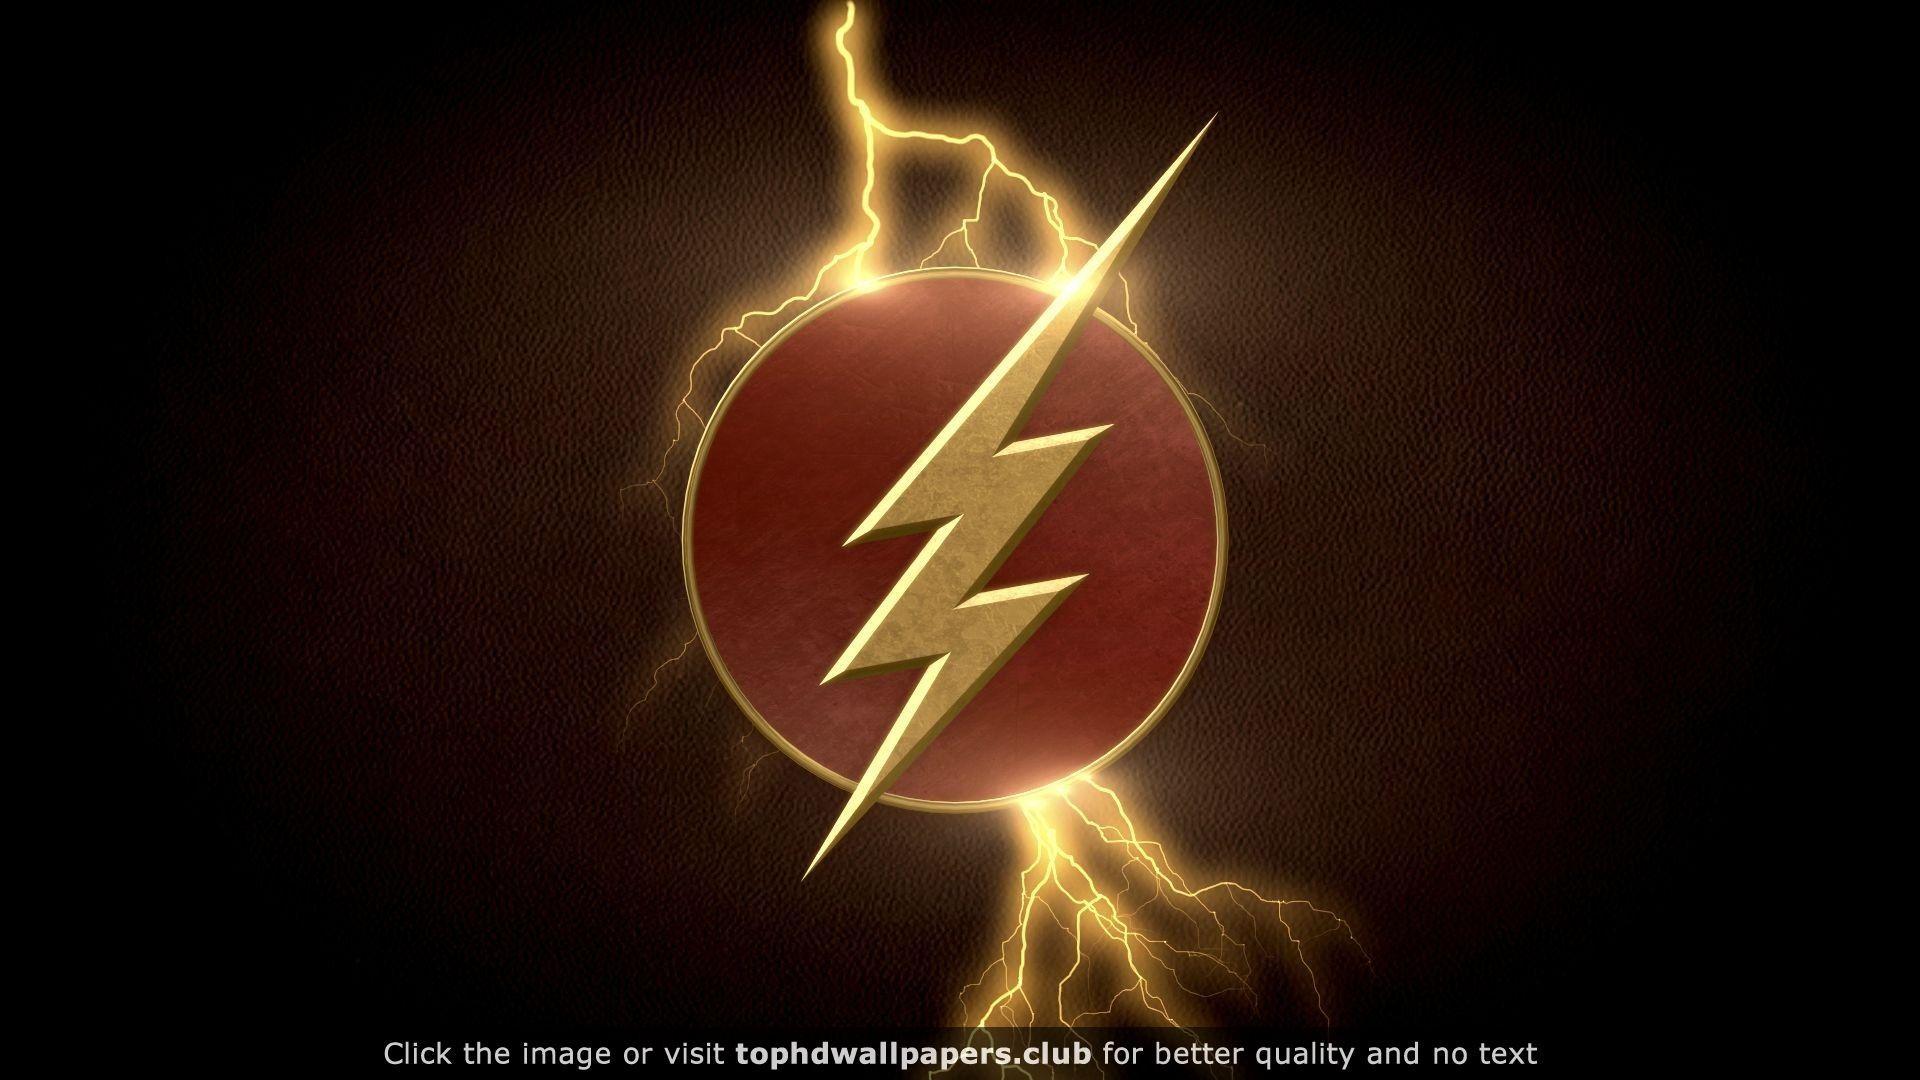 The Flash HD wallpaper for your PC, Mac or Mobile device. Desktop